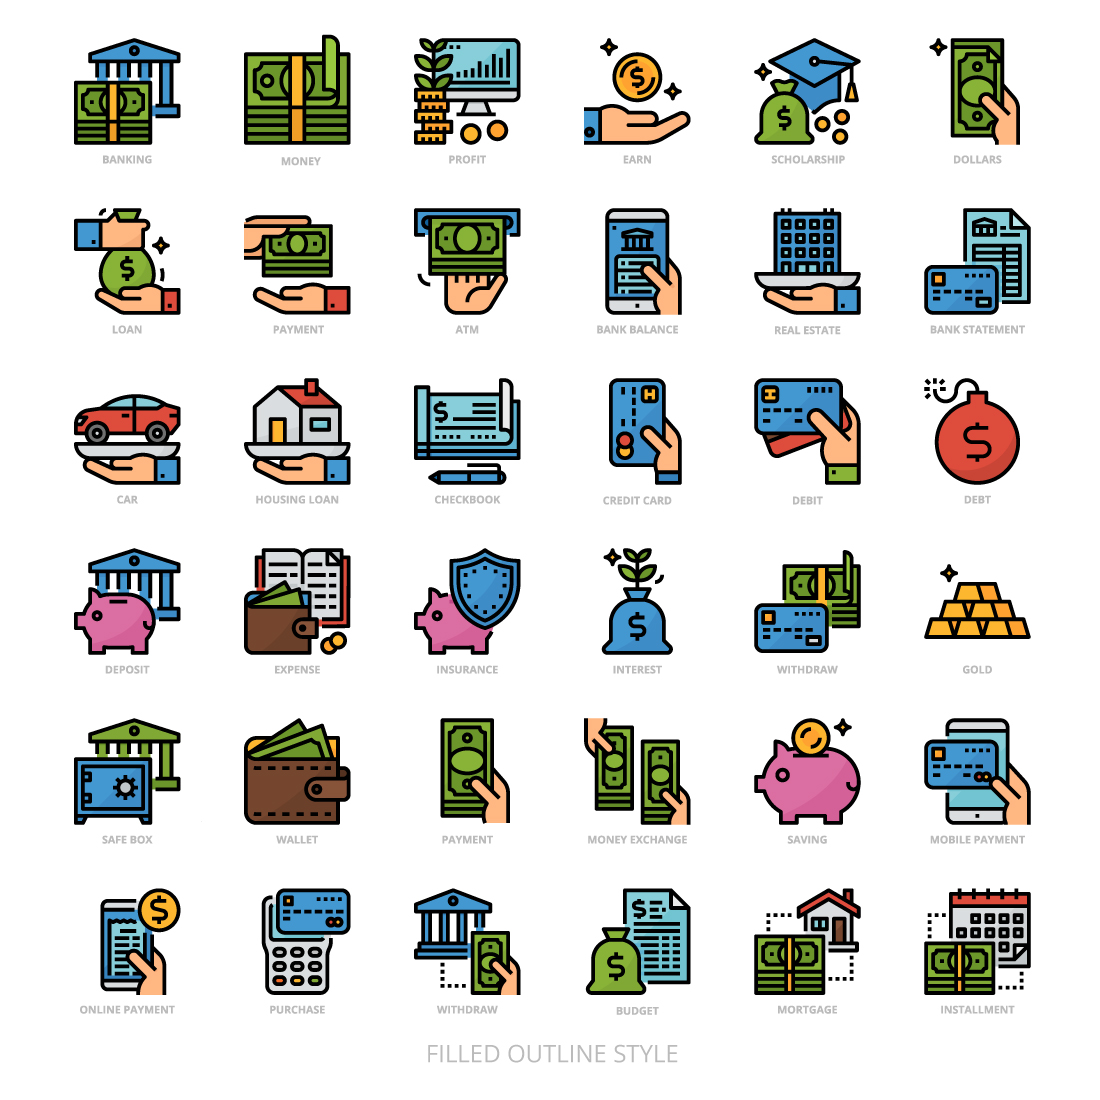 36 Banking Icons Set x 4 Styles cover image.